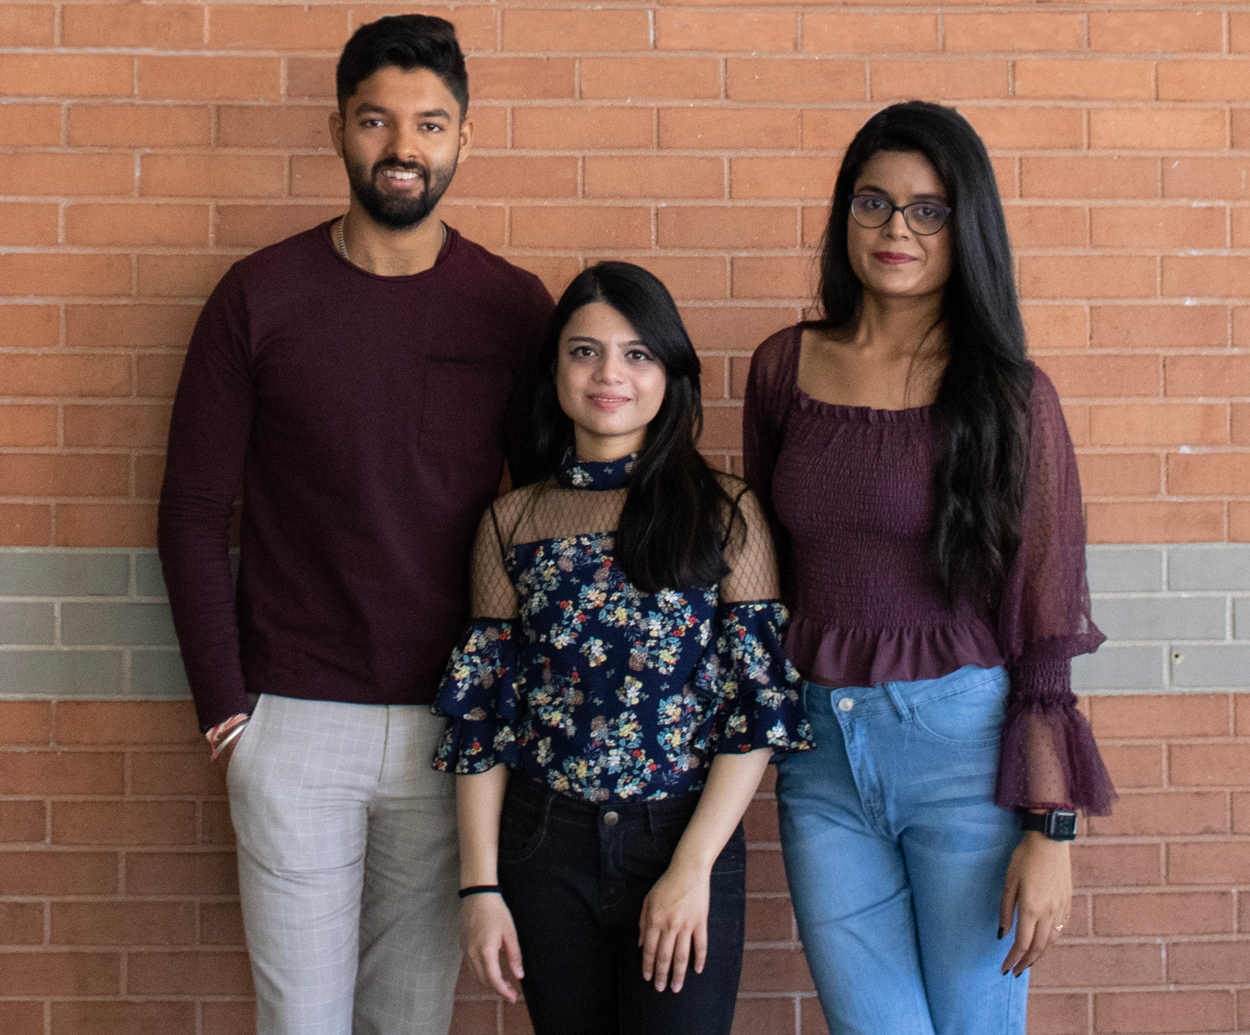 Aakash, Bhumi, and Shreya stand together against a red and grey brick background on UArizona Campus